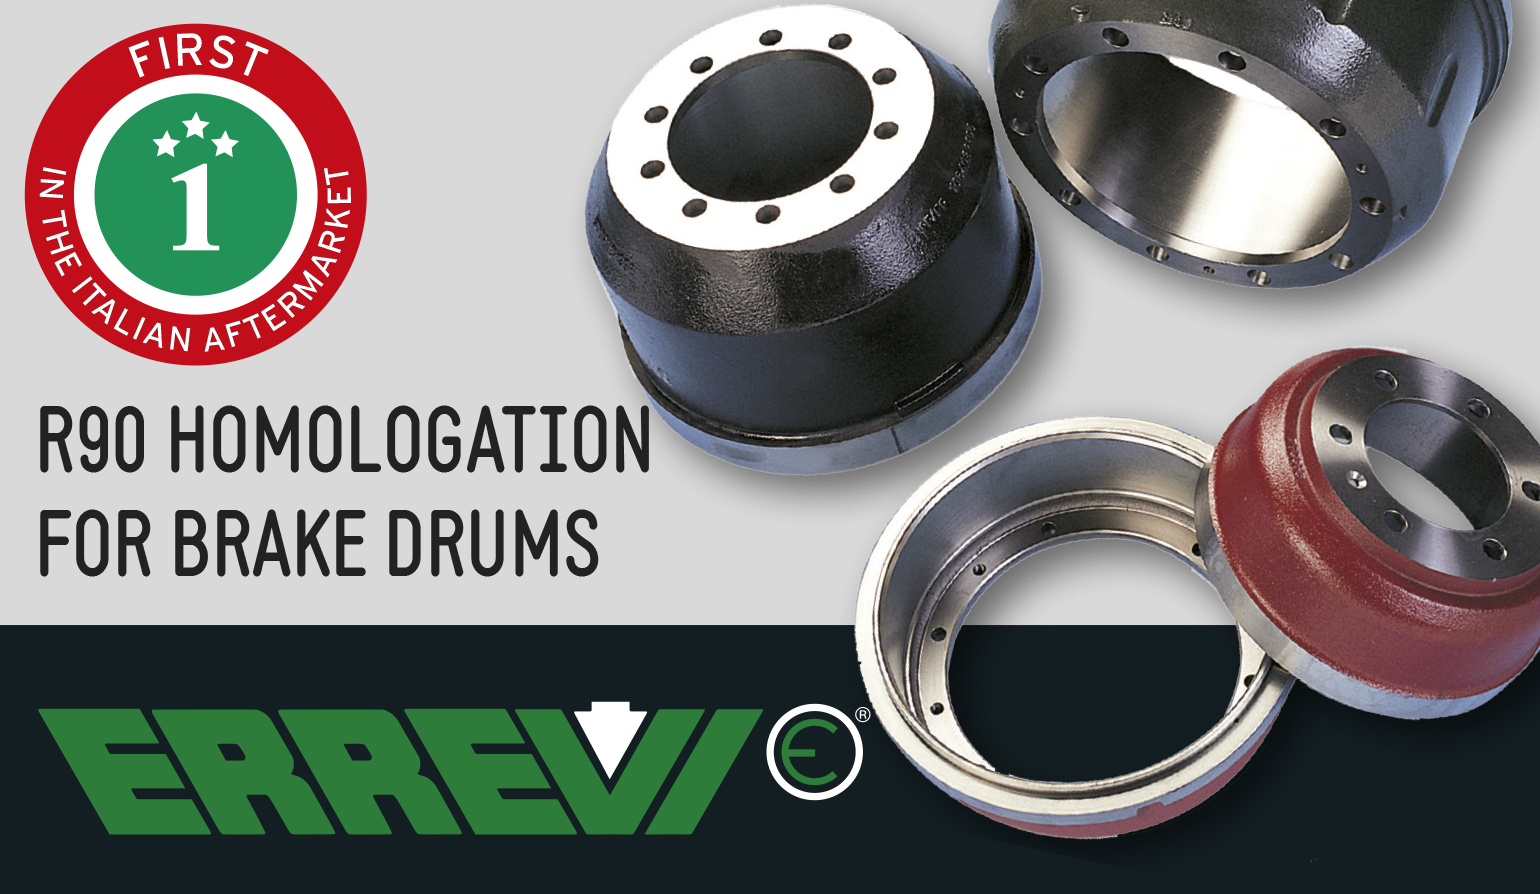 FIRST IN THE ITALIAN AFTERMARKET TO REACH  THE R90 HOMOLOGATION FOR BRAKE DRUMS